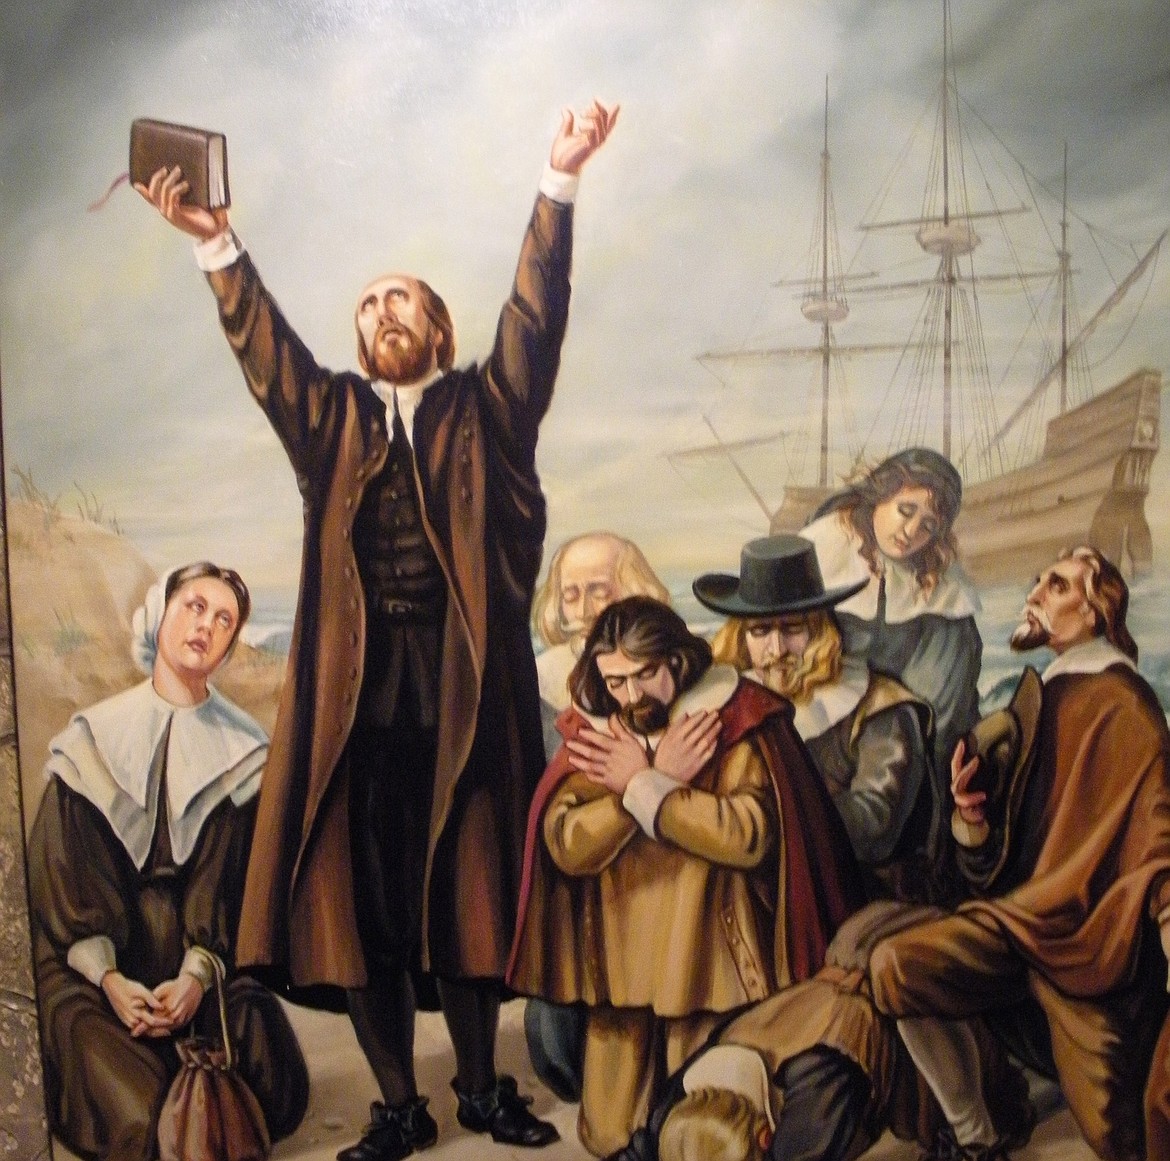 The Puritans arrived in Massachusetts Bay from England 10 years after the.....